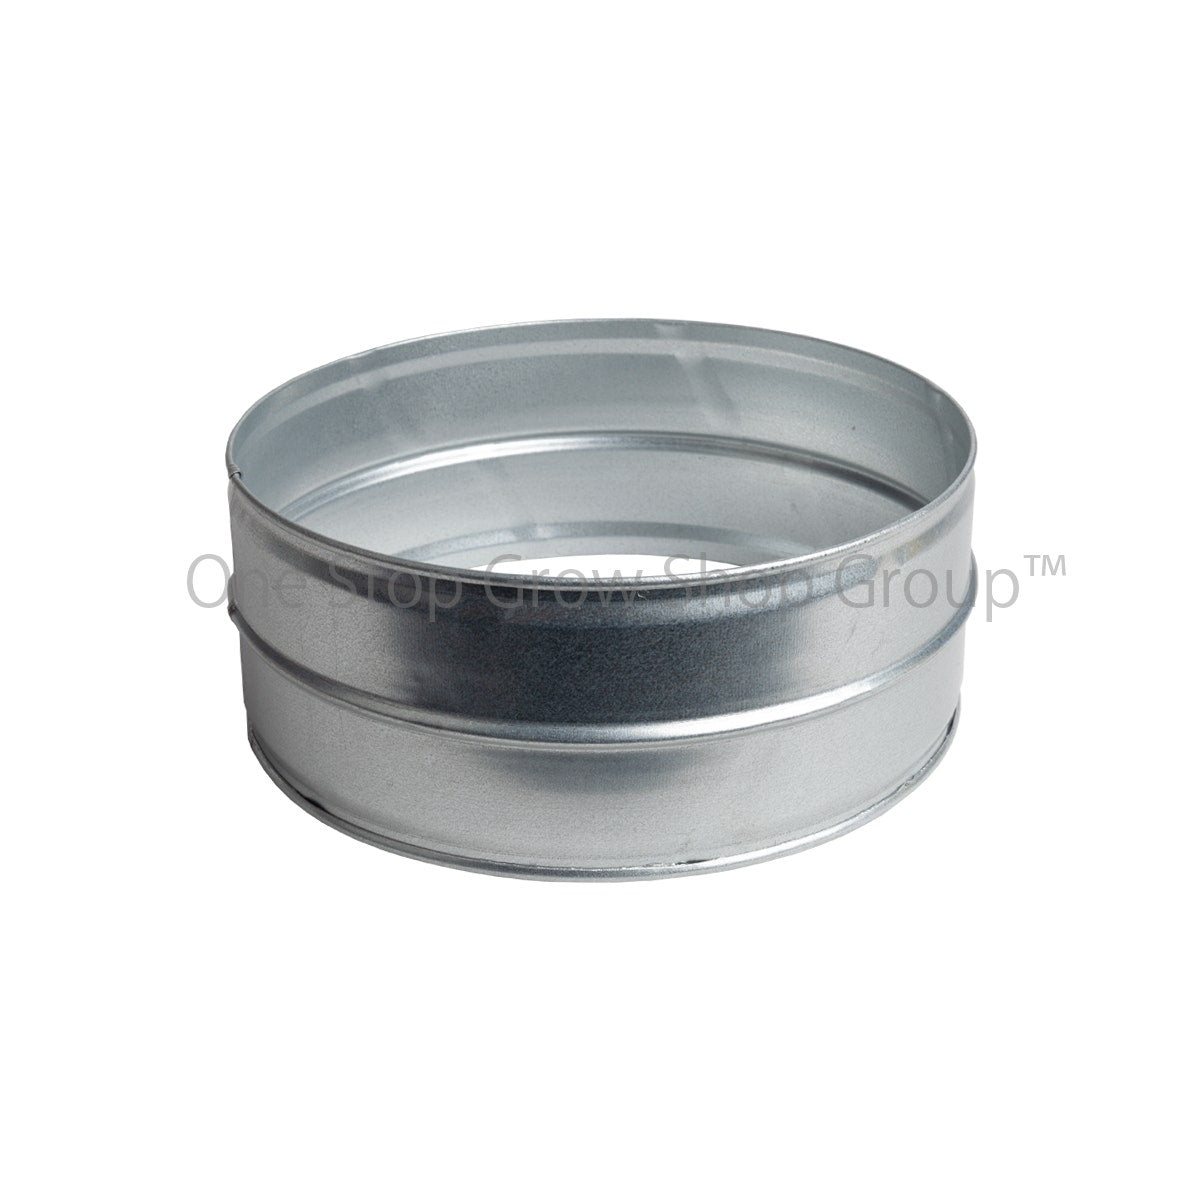 Male to Male Coupling Rigid Ducting Part